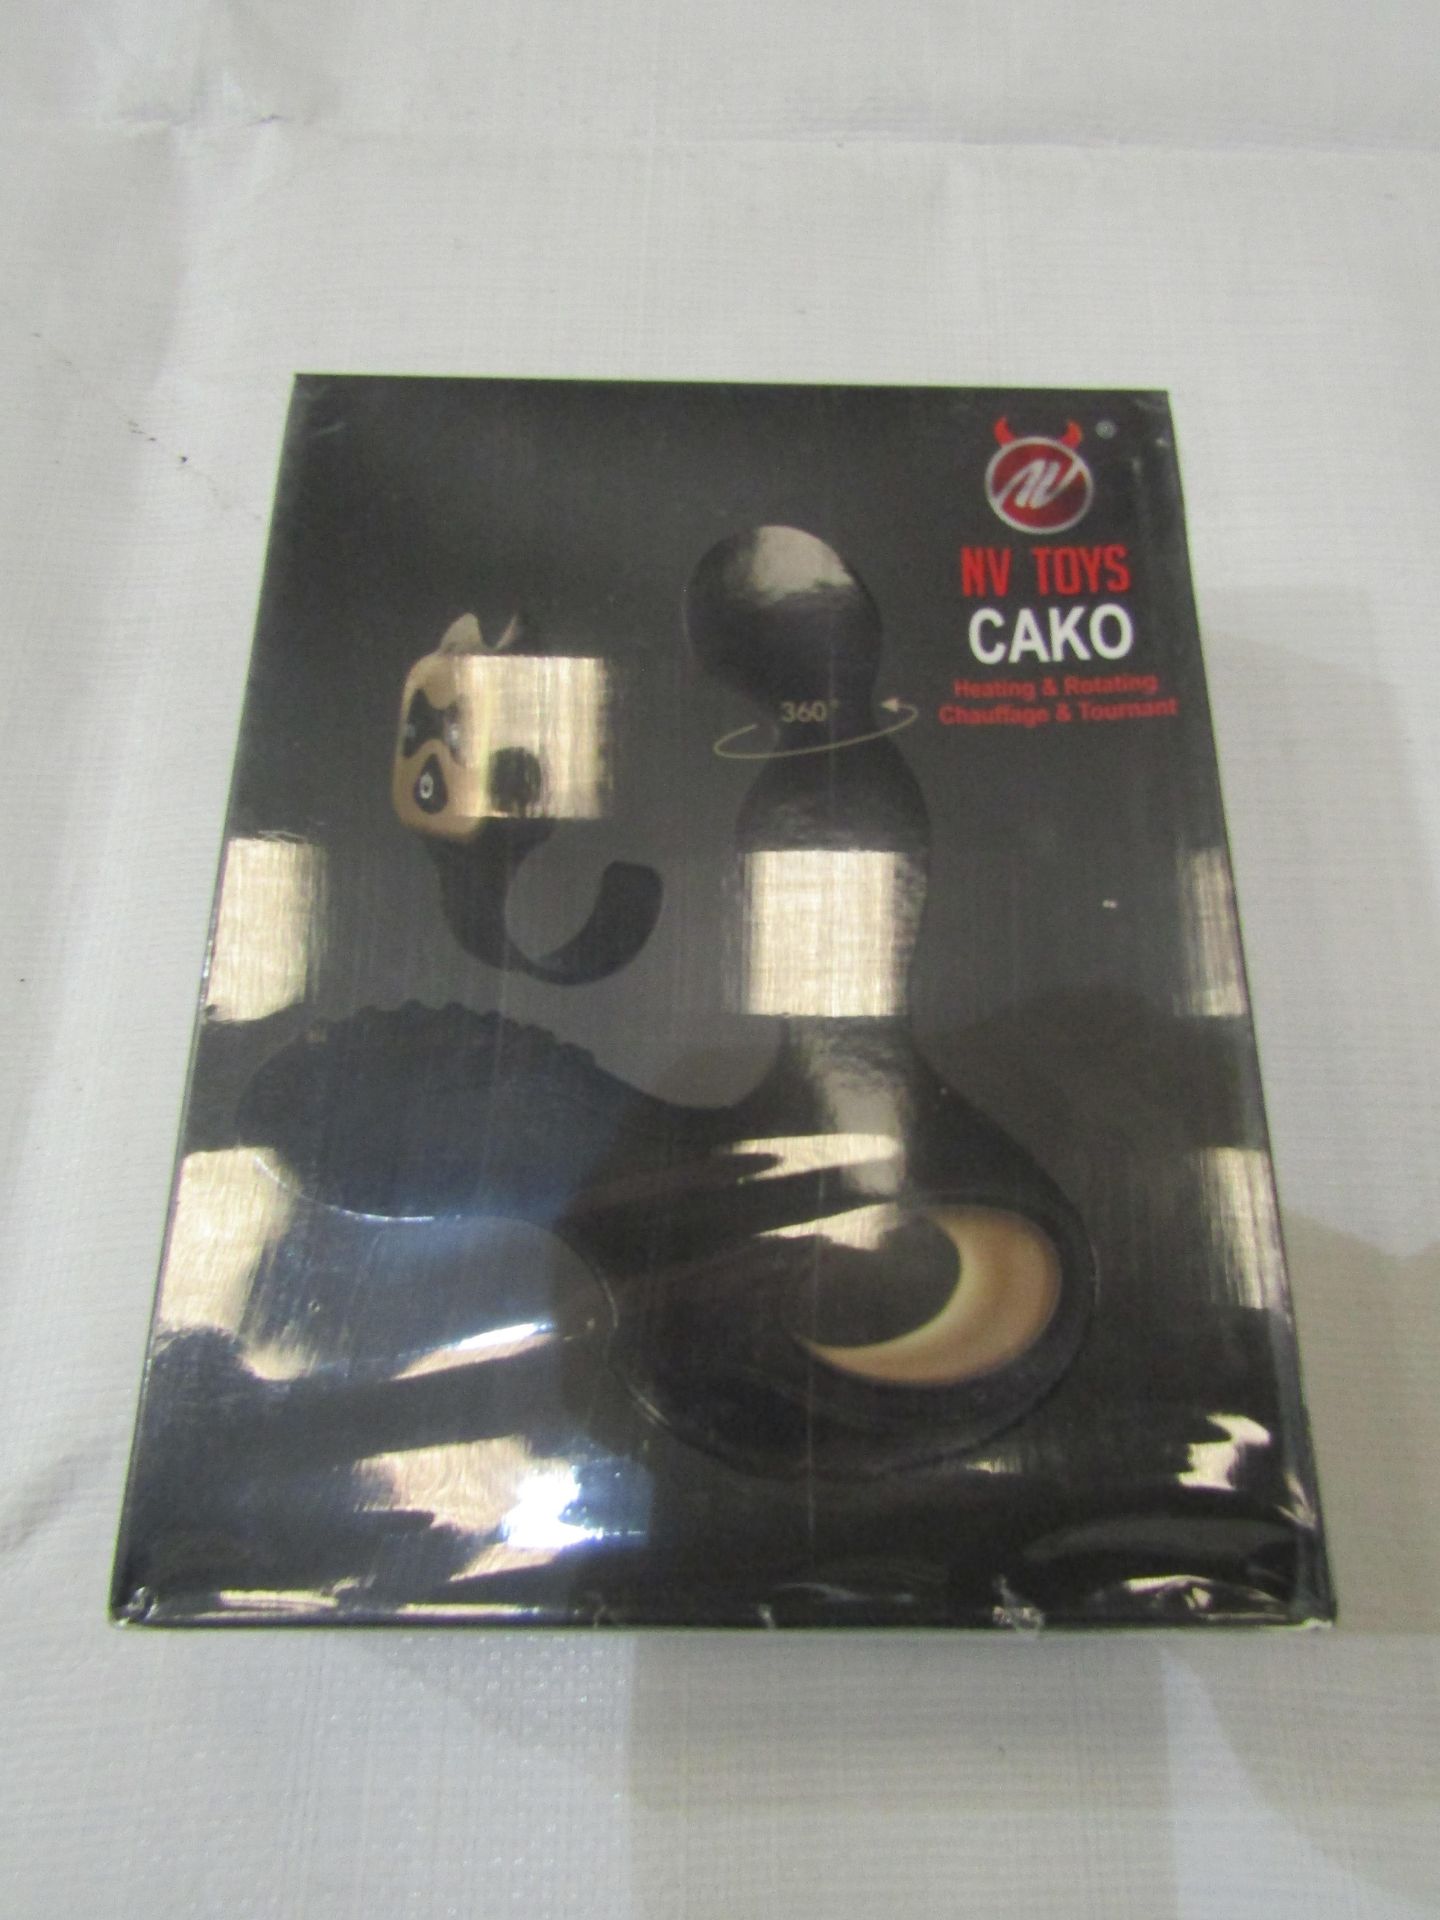 NV Toys Cako Heating & Rotating Sex Toy - New & Boxed.